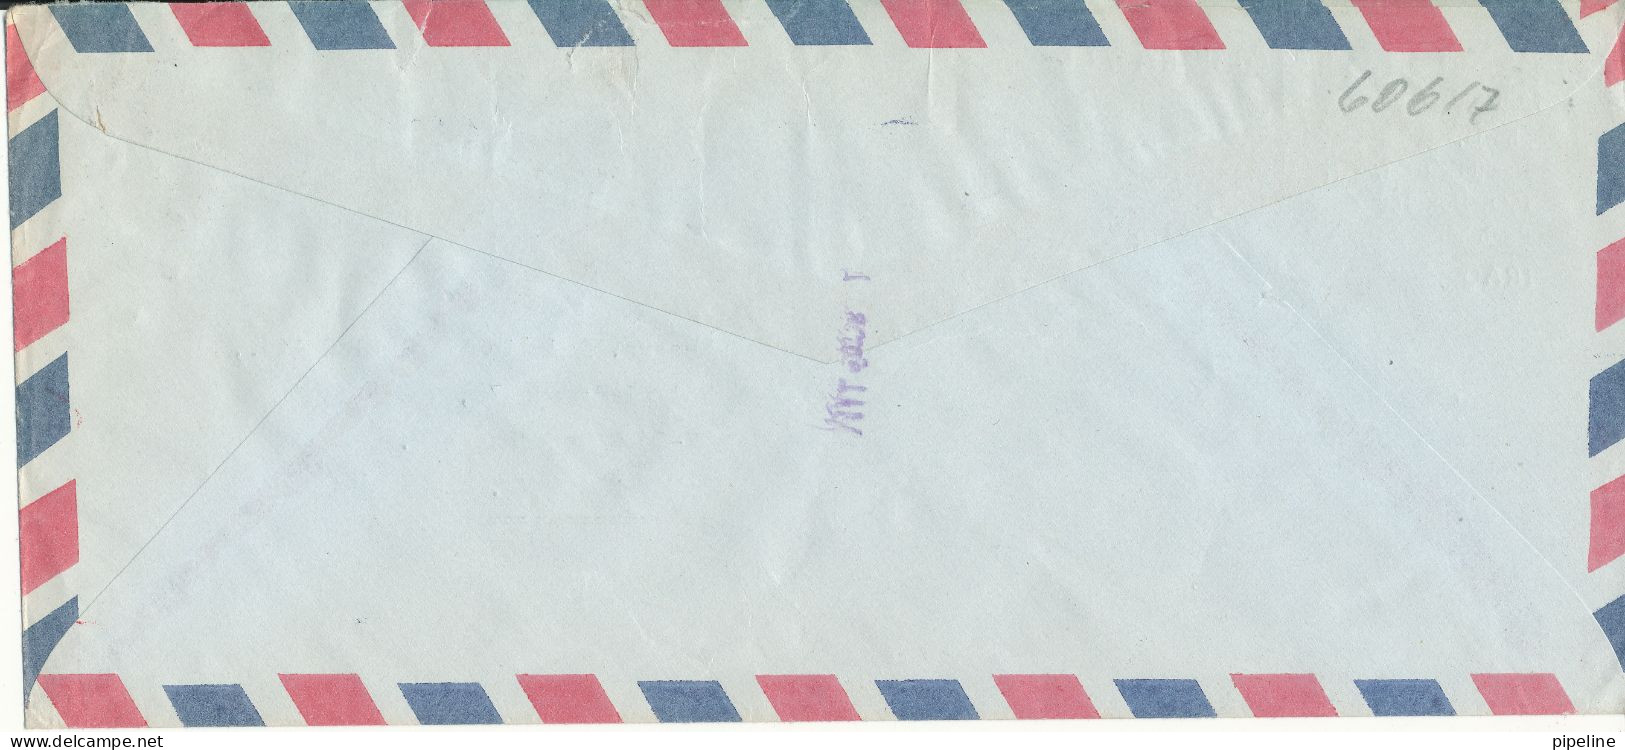 Iraq Air Mail Cover Sent To Denmark Topic Stamps - Iraq